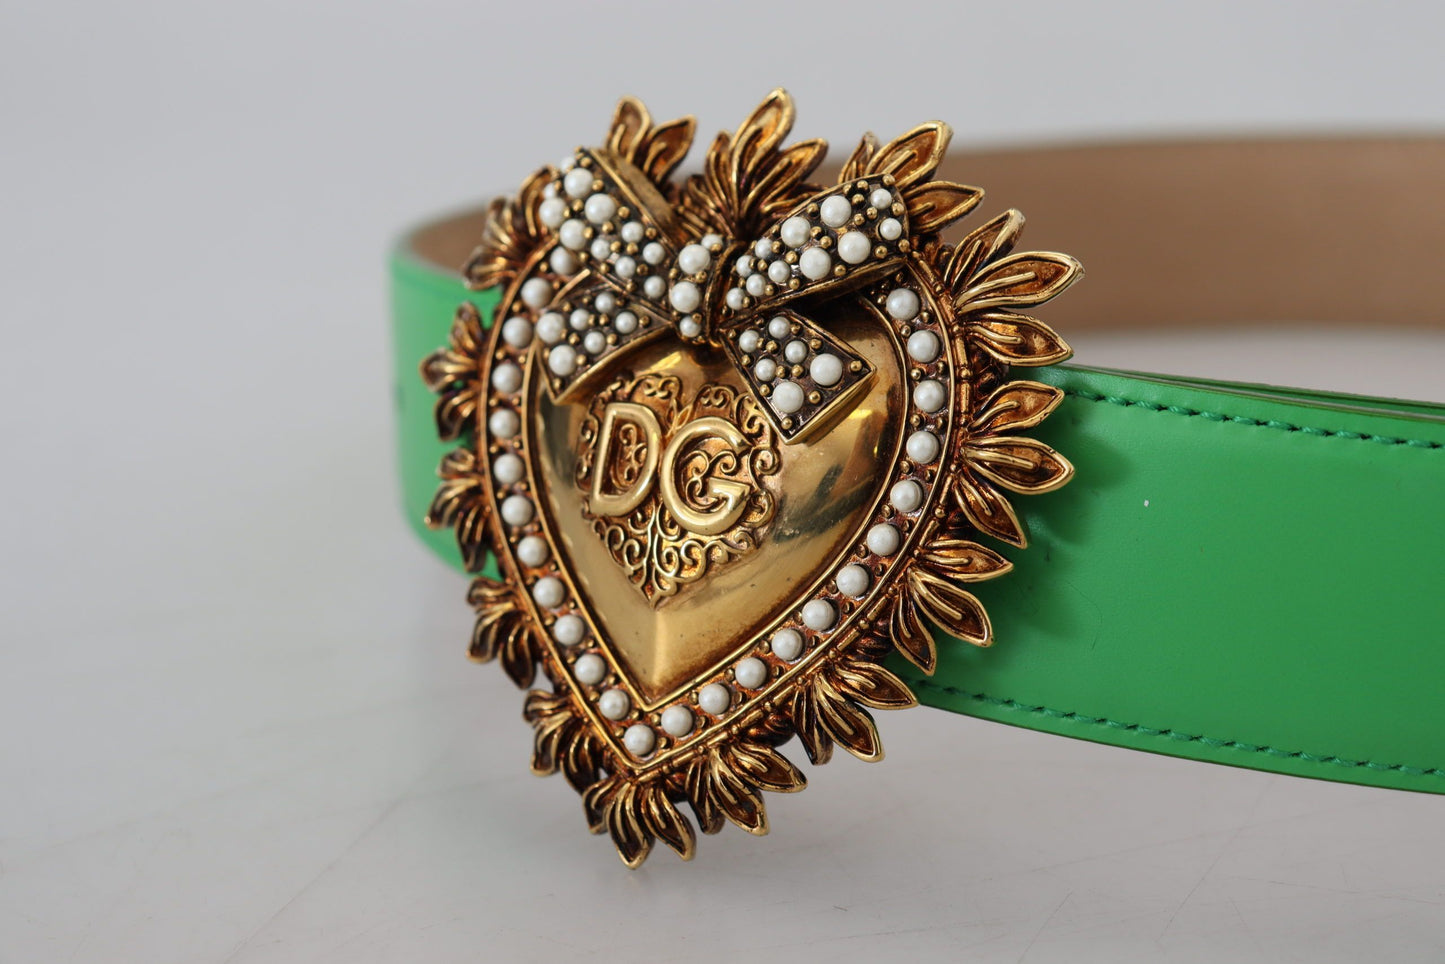 Elegant Green Leather Belt with Gold Buckle